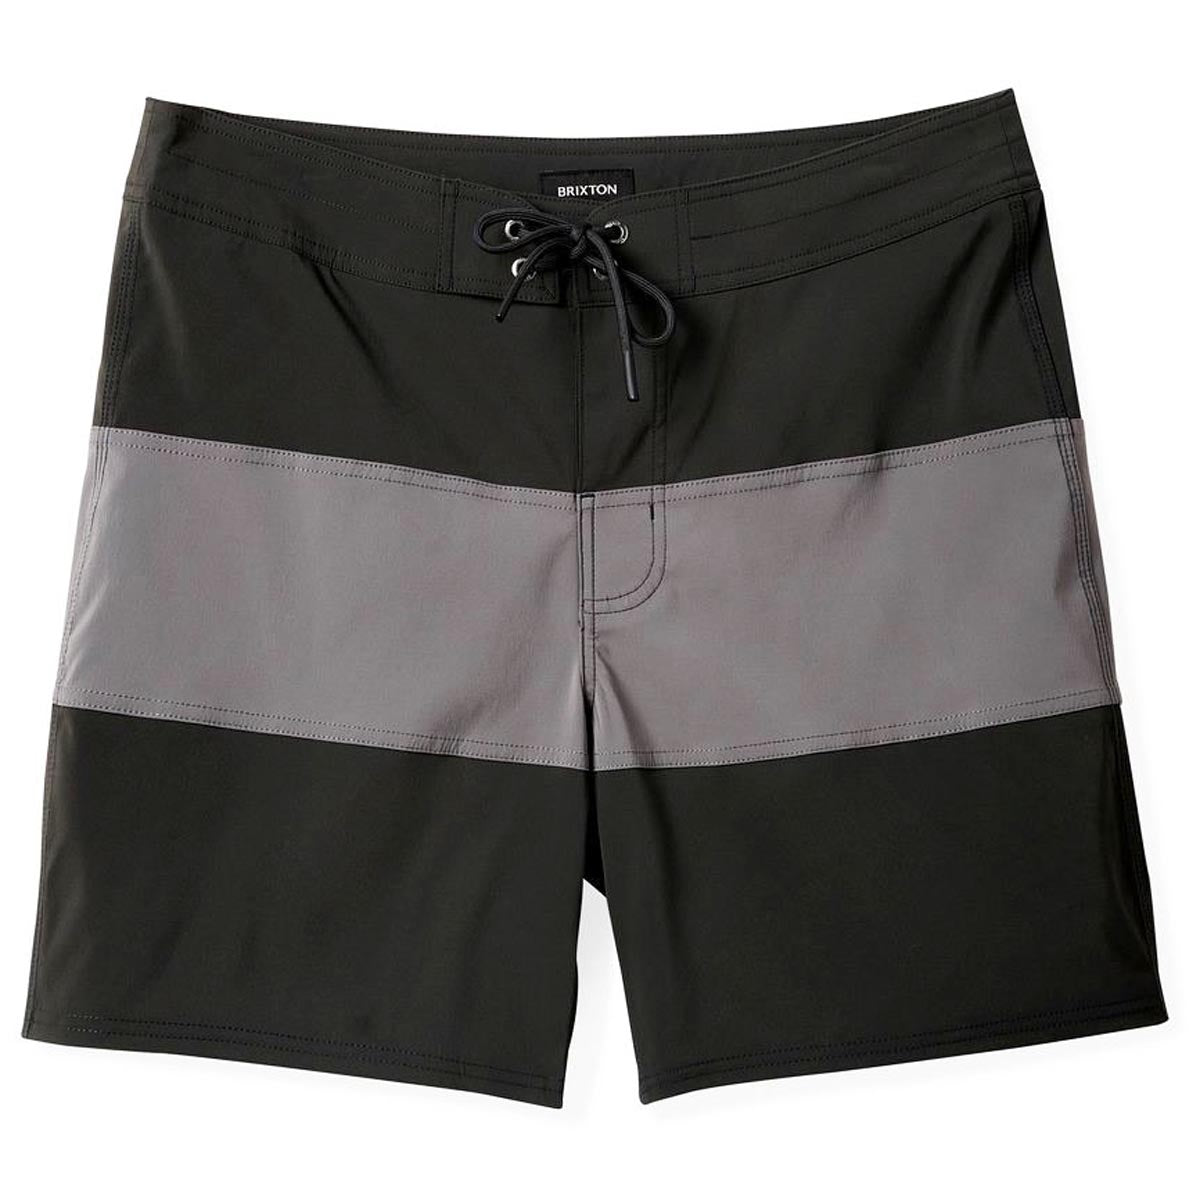 Brixton 60's Stretch Board Shorts - Washed Black/Charcoal image 1